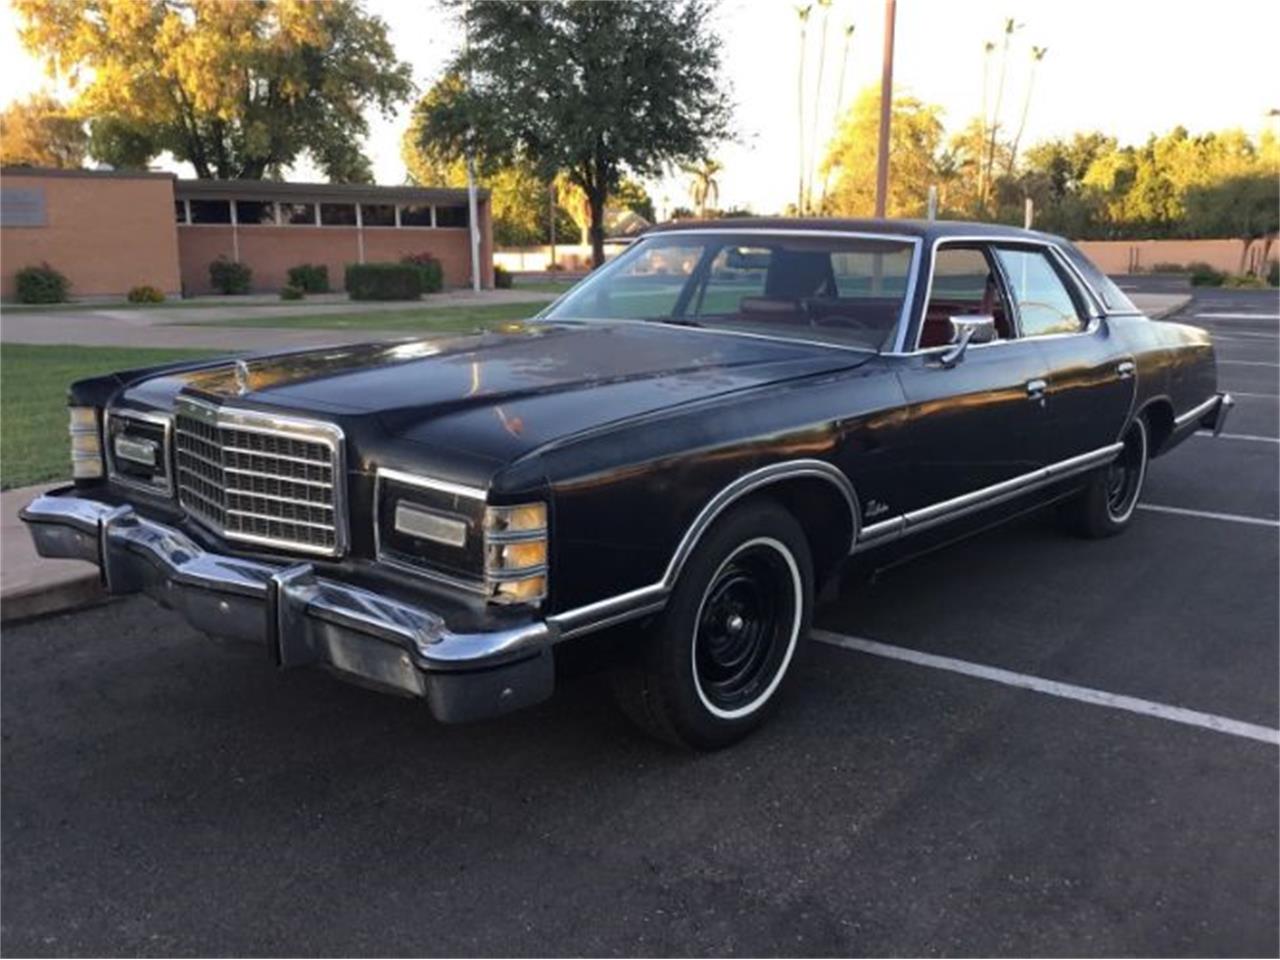 1977 to 1979 Ford LTD for Sale on ClassicCars.com